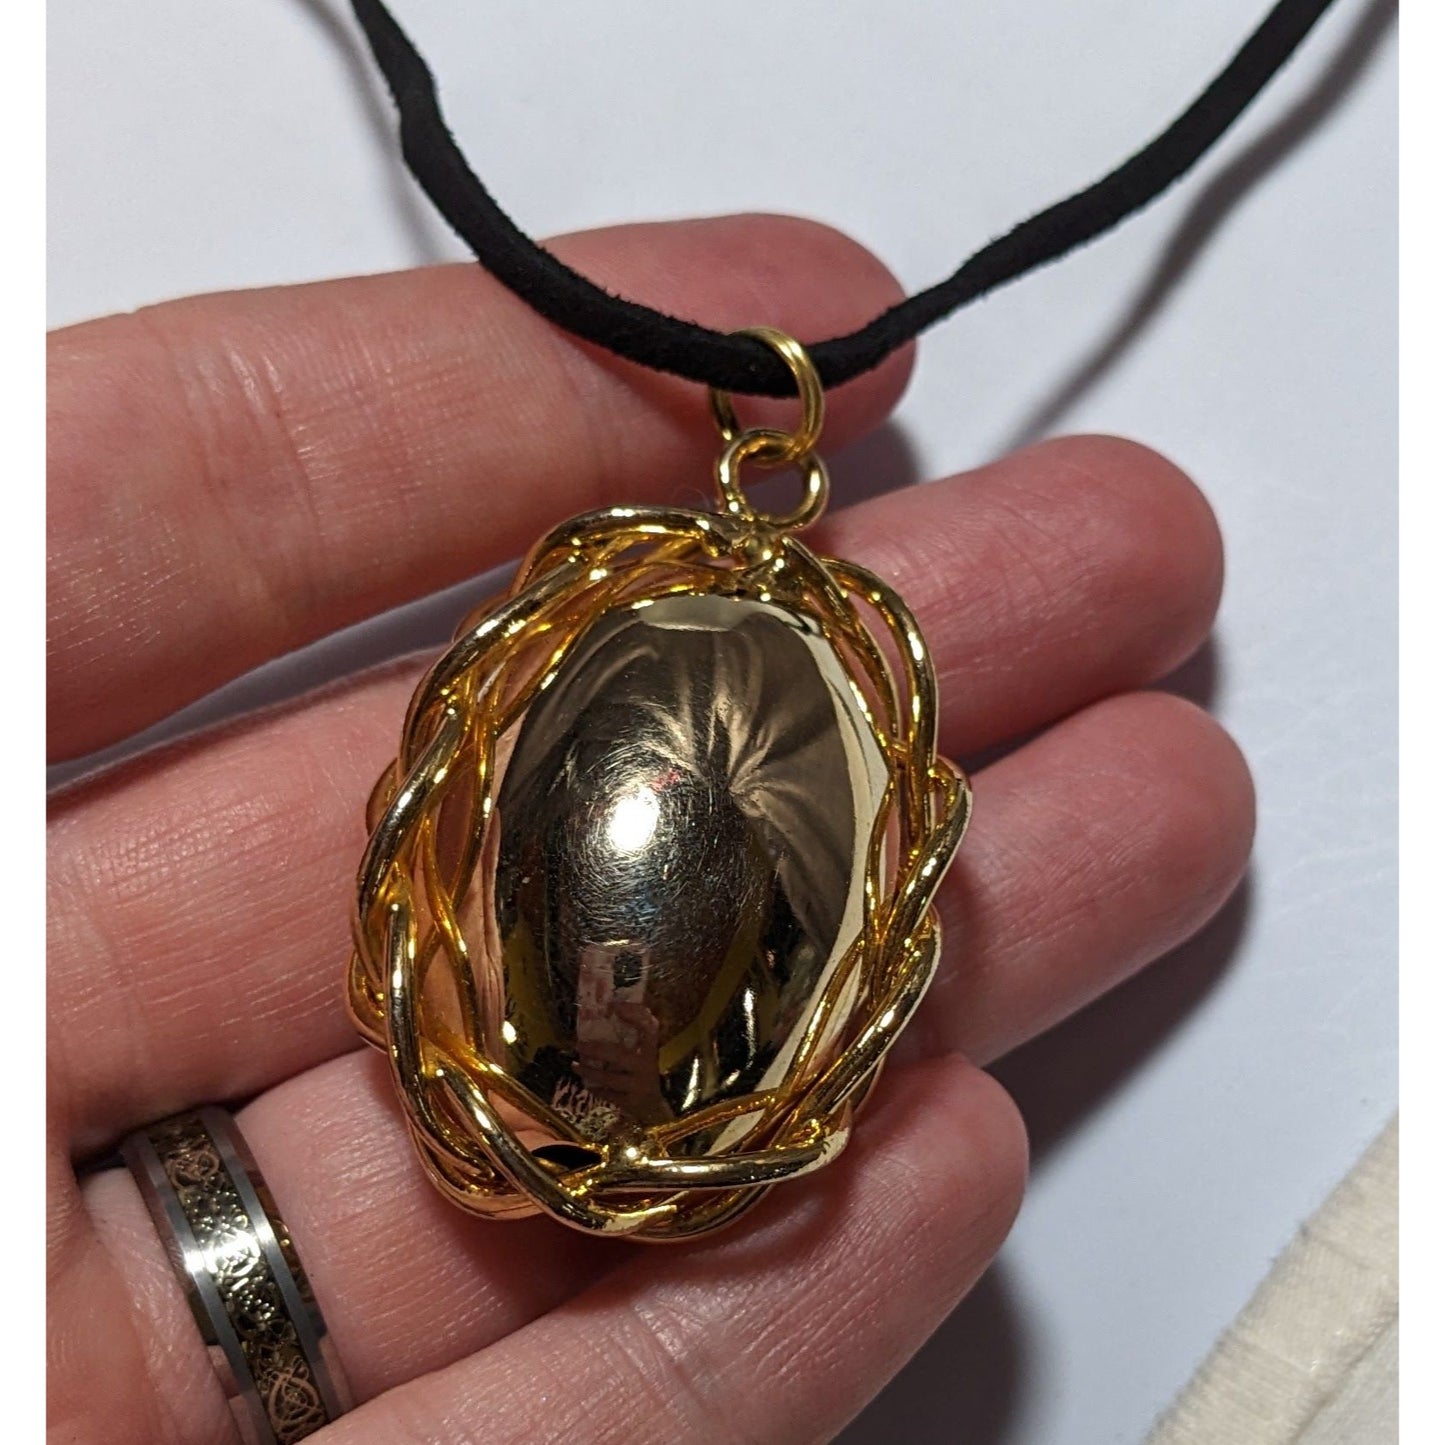 Wrapped Gold Egg Necklace